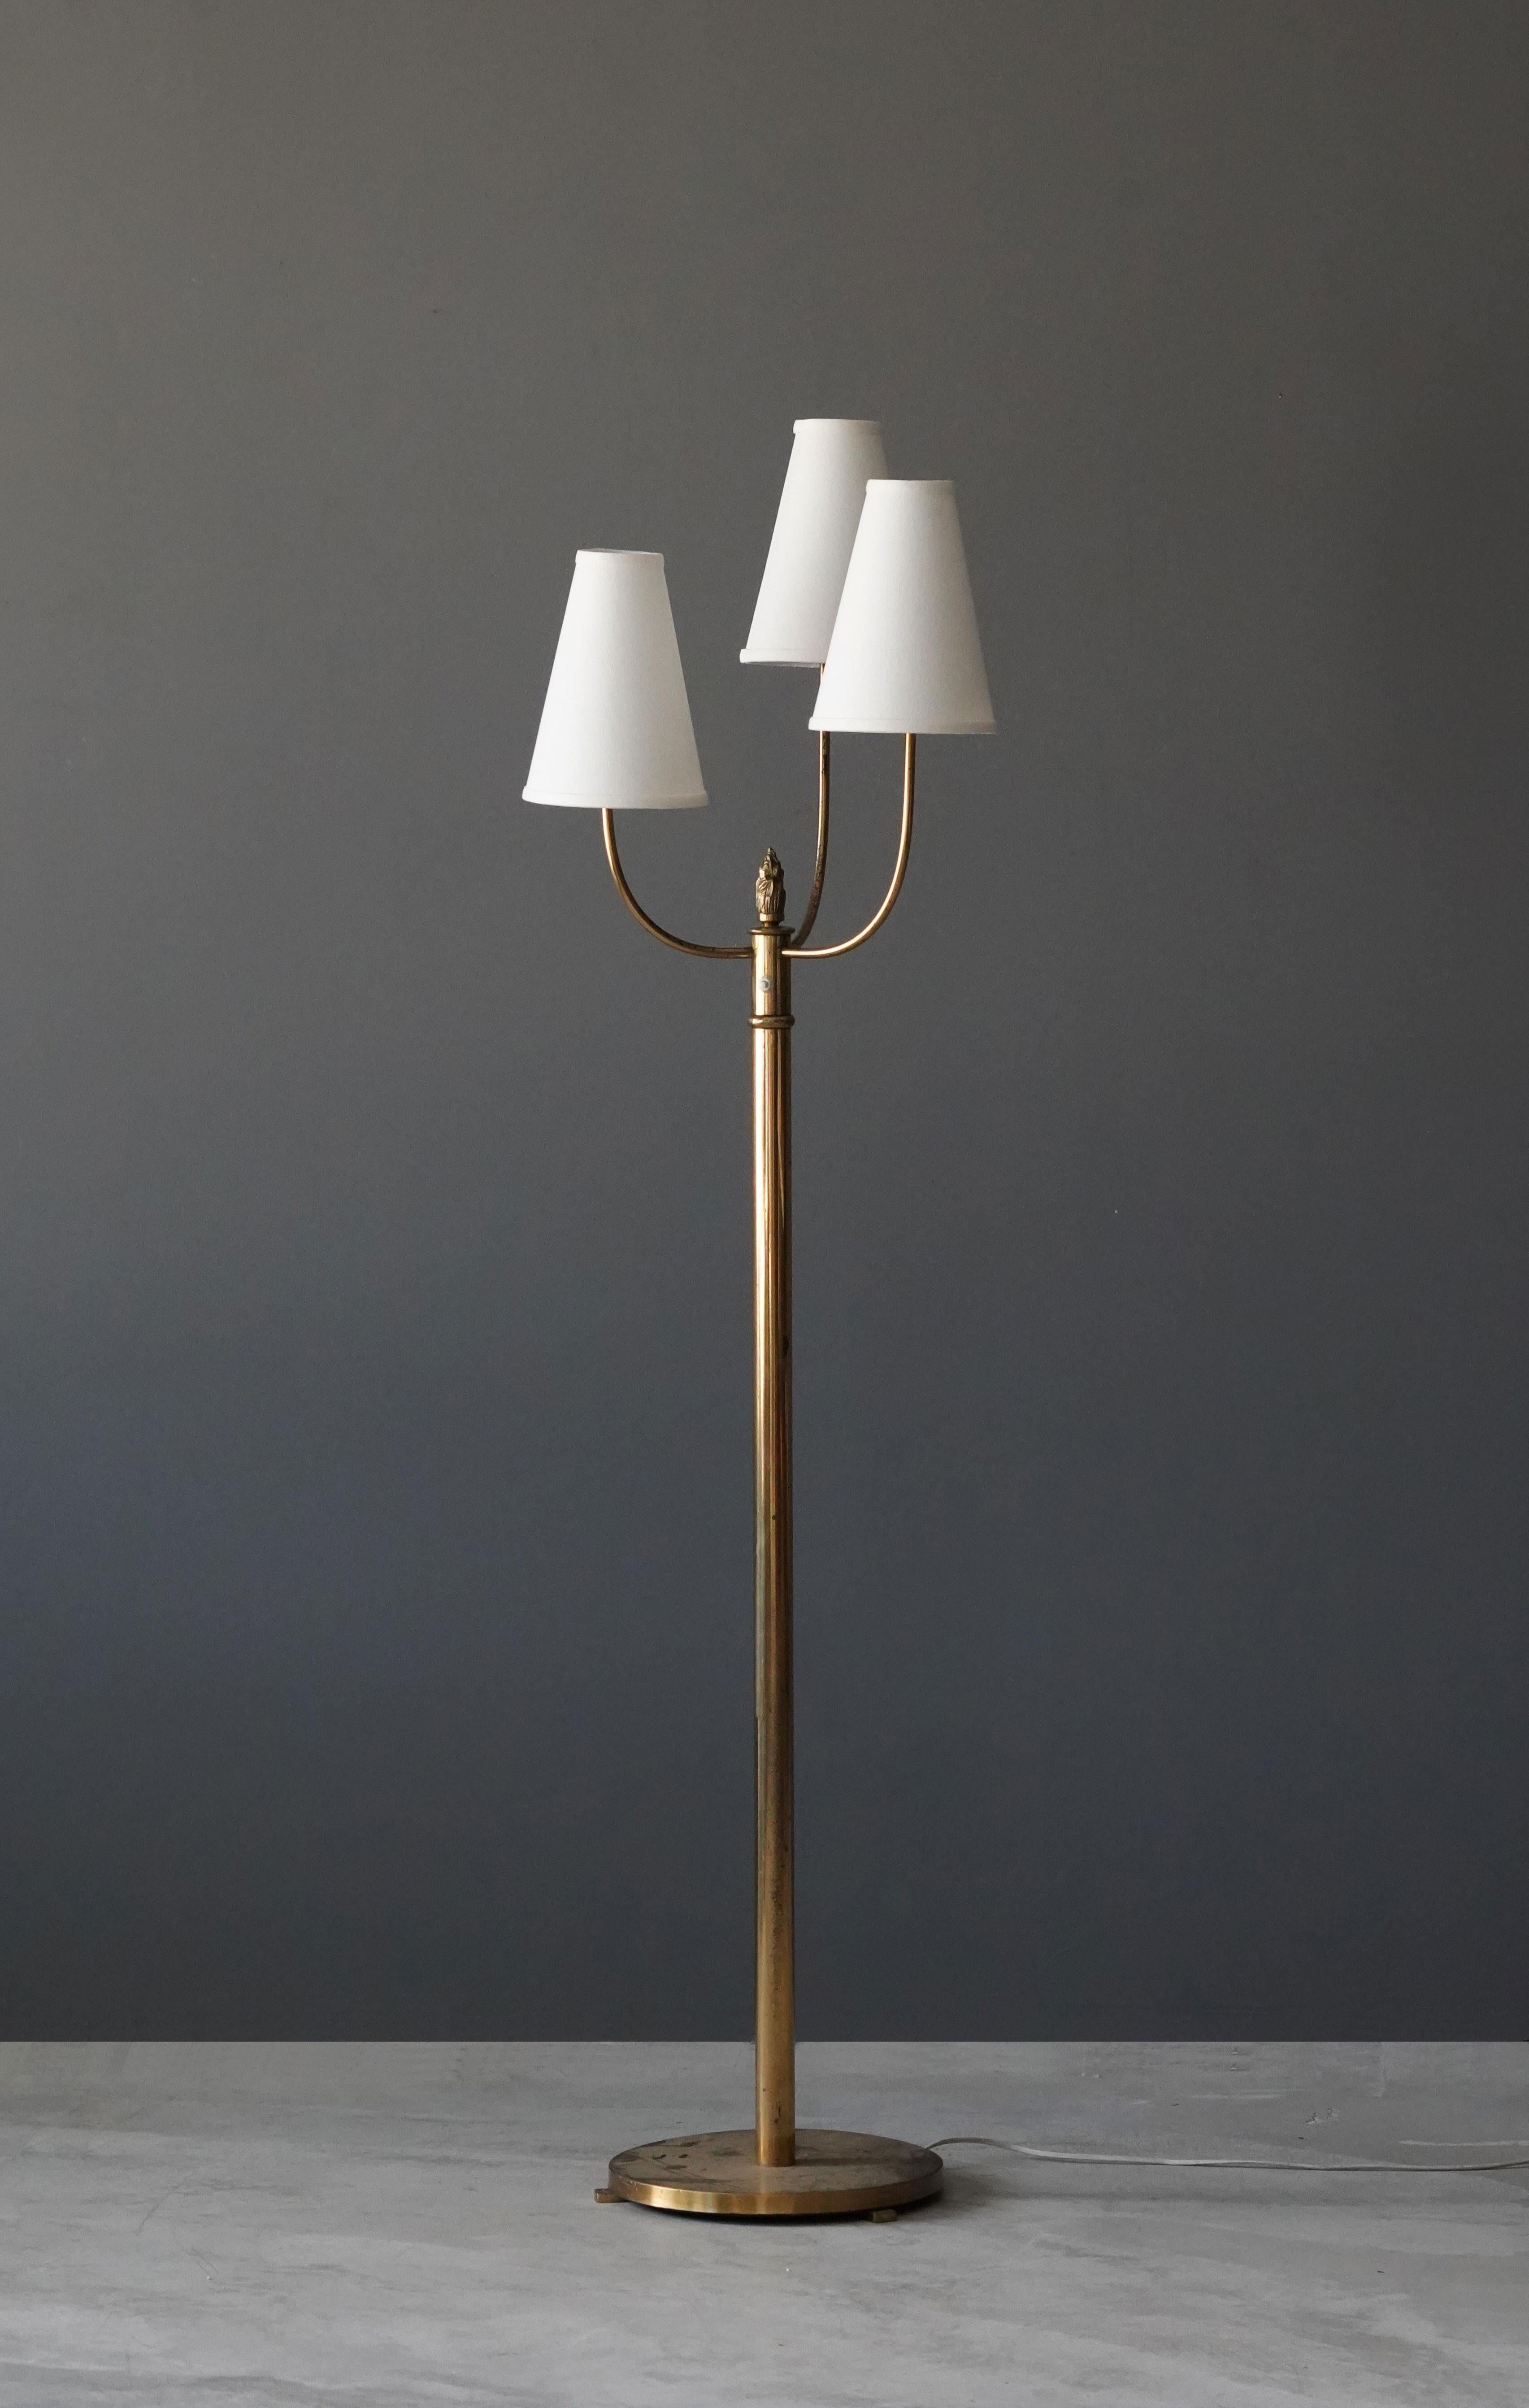 A three-armed functionalist floor lamp. With brand new high-end lampshades.

Other designers of the period include Josef Frank, Paavo Tynell, Hans Agne Jacobsen, and Alvar Aalto.